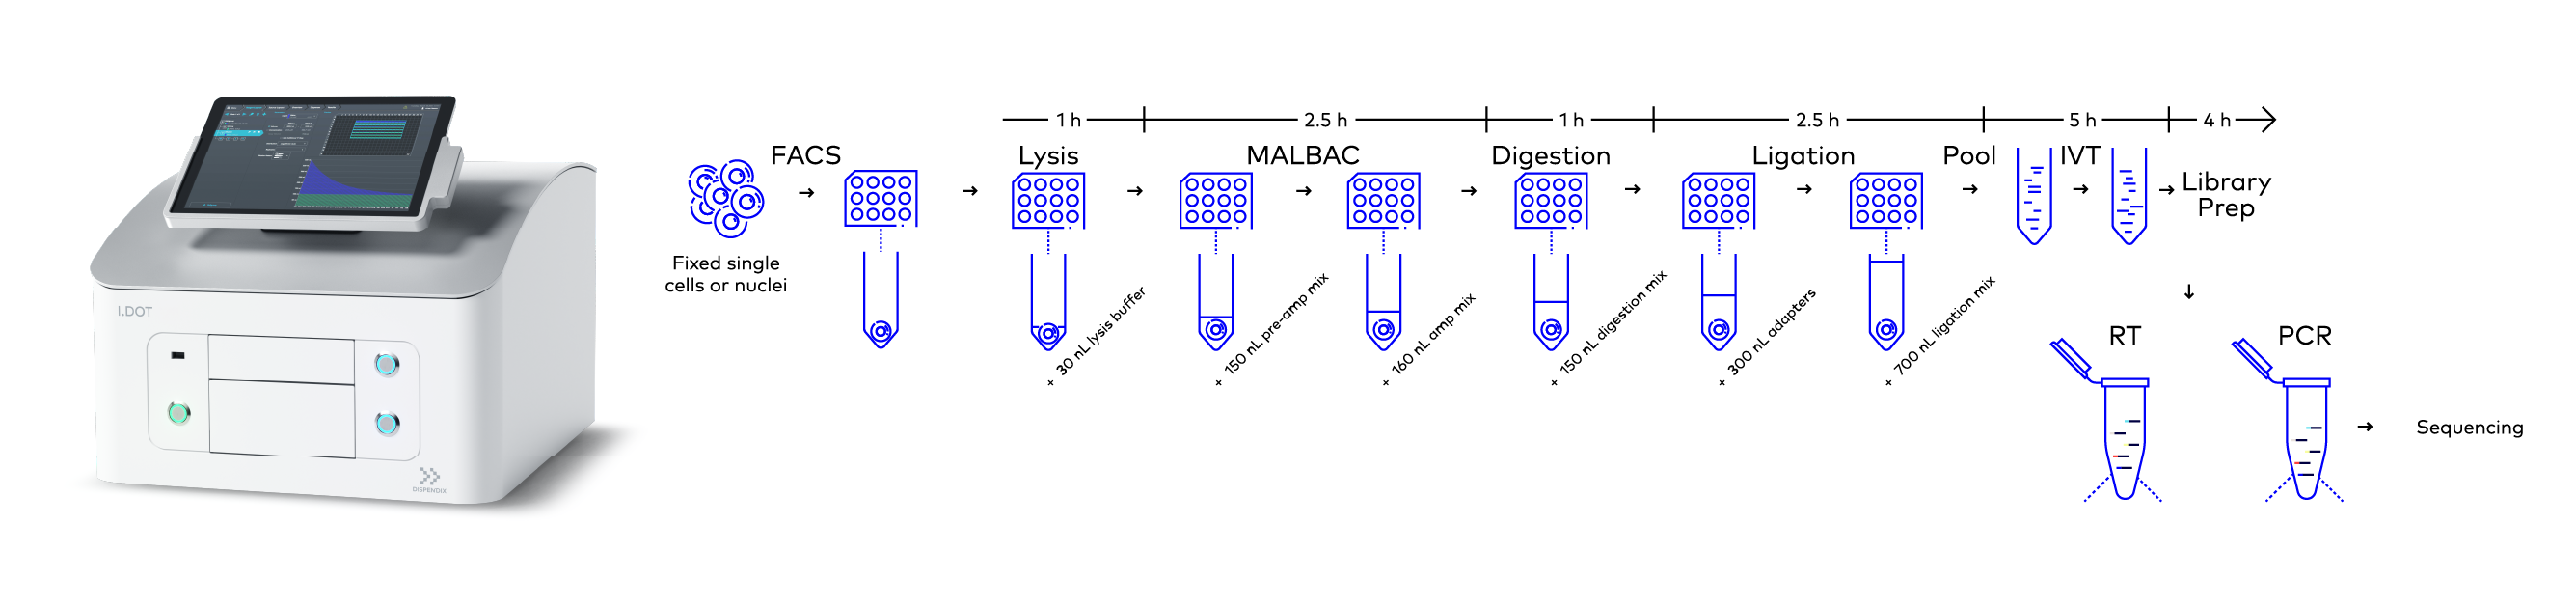 Workflow of scCUTseq. Briefly, fixed single cells or nuclei are FACS sorted into a multi-well plate and WGA is carried out using MALBAC in three steps: lysis, pre-amplification, and amplification. Digestion, ligation, and library preparation are then performed. The dispensing of all the reagents in these processes was done using the I.DOT Liquid handler. Image modified from Michele Simonetti, Ph.D. thesis, 2021.